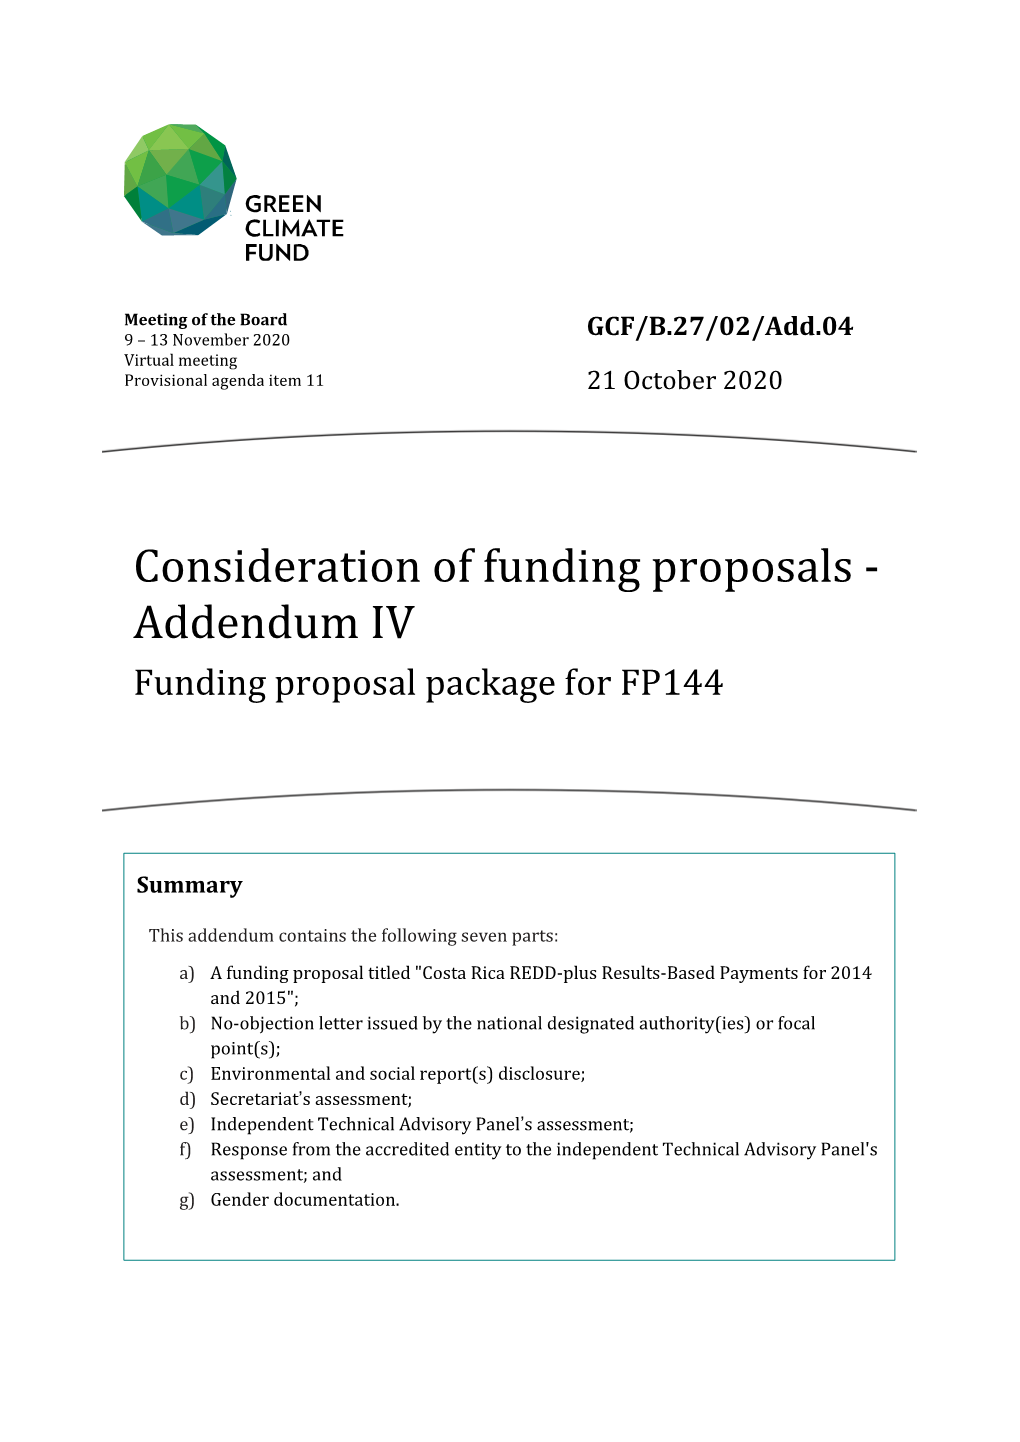 Funding Proposals - Addendum IV Funding Proposal Package for FP144